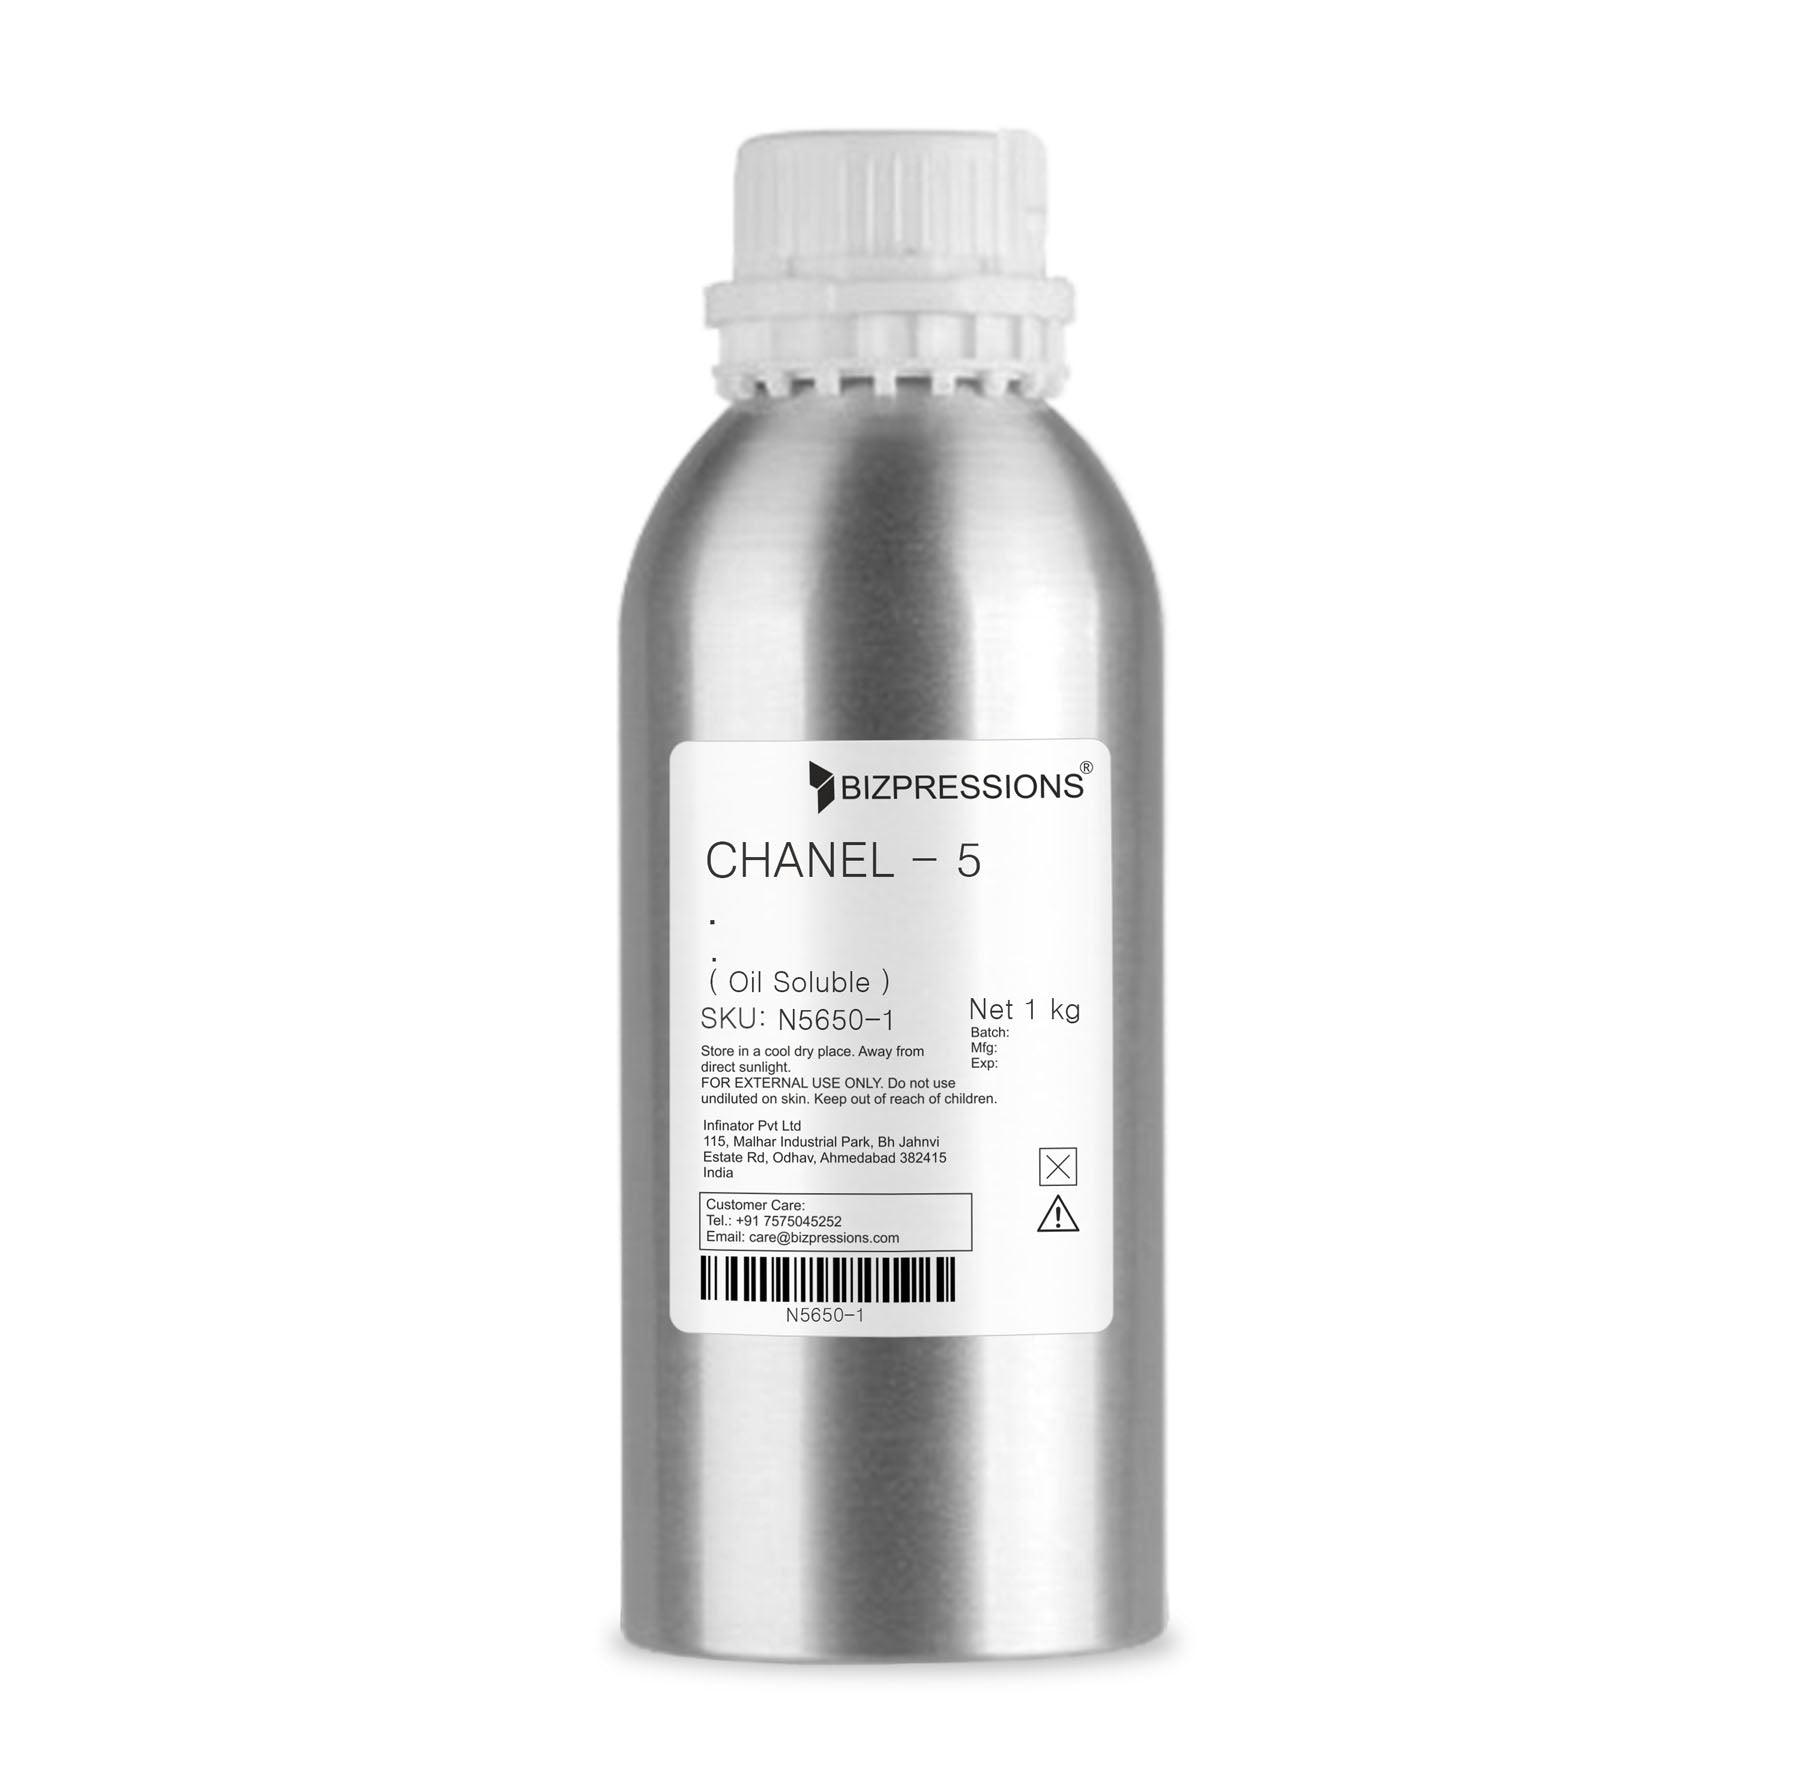 CHANEL - 5 - Fragrance ( Oil Soluble )